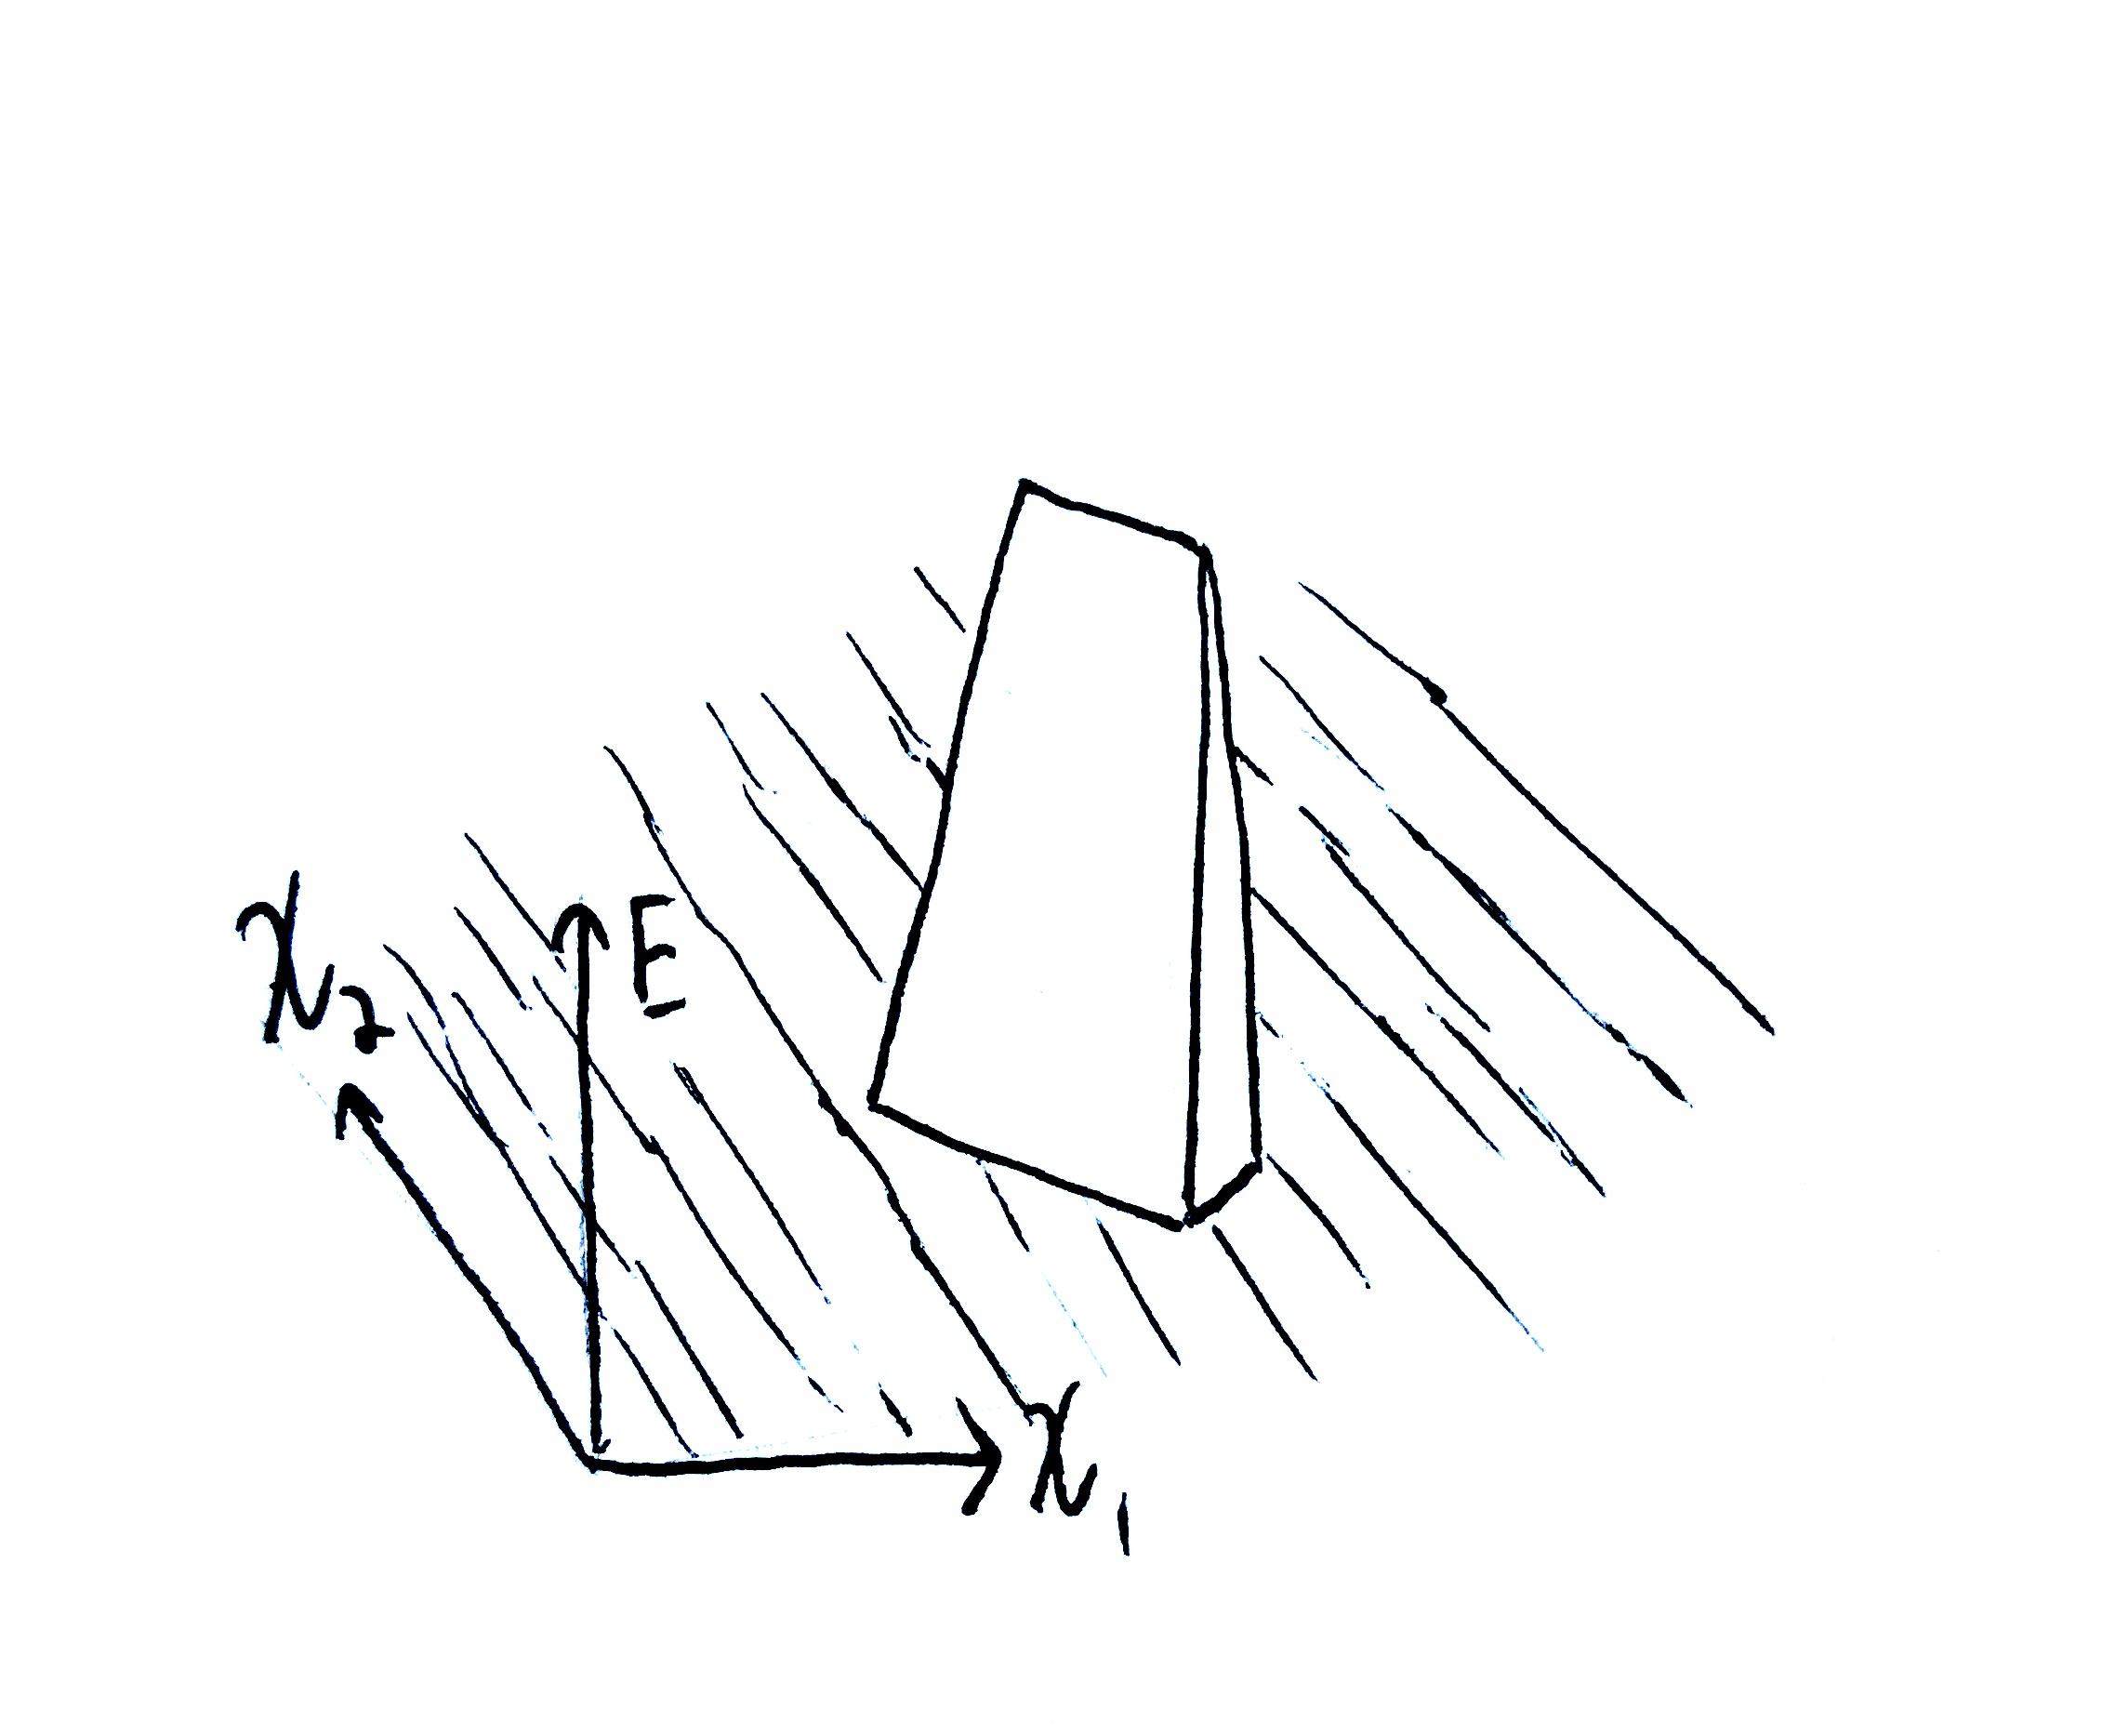 A micro-wall is a spatially small (localized) wall in the potential field.